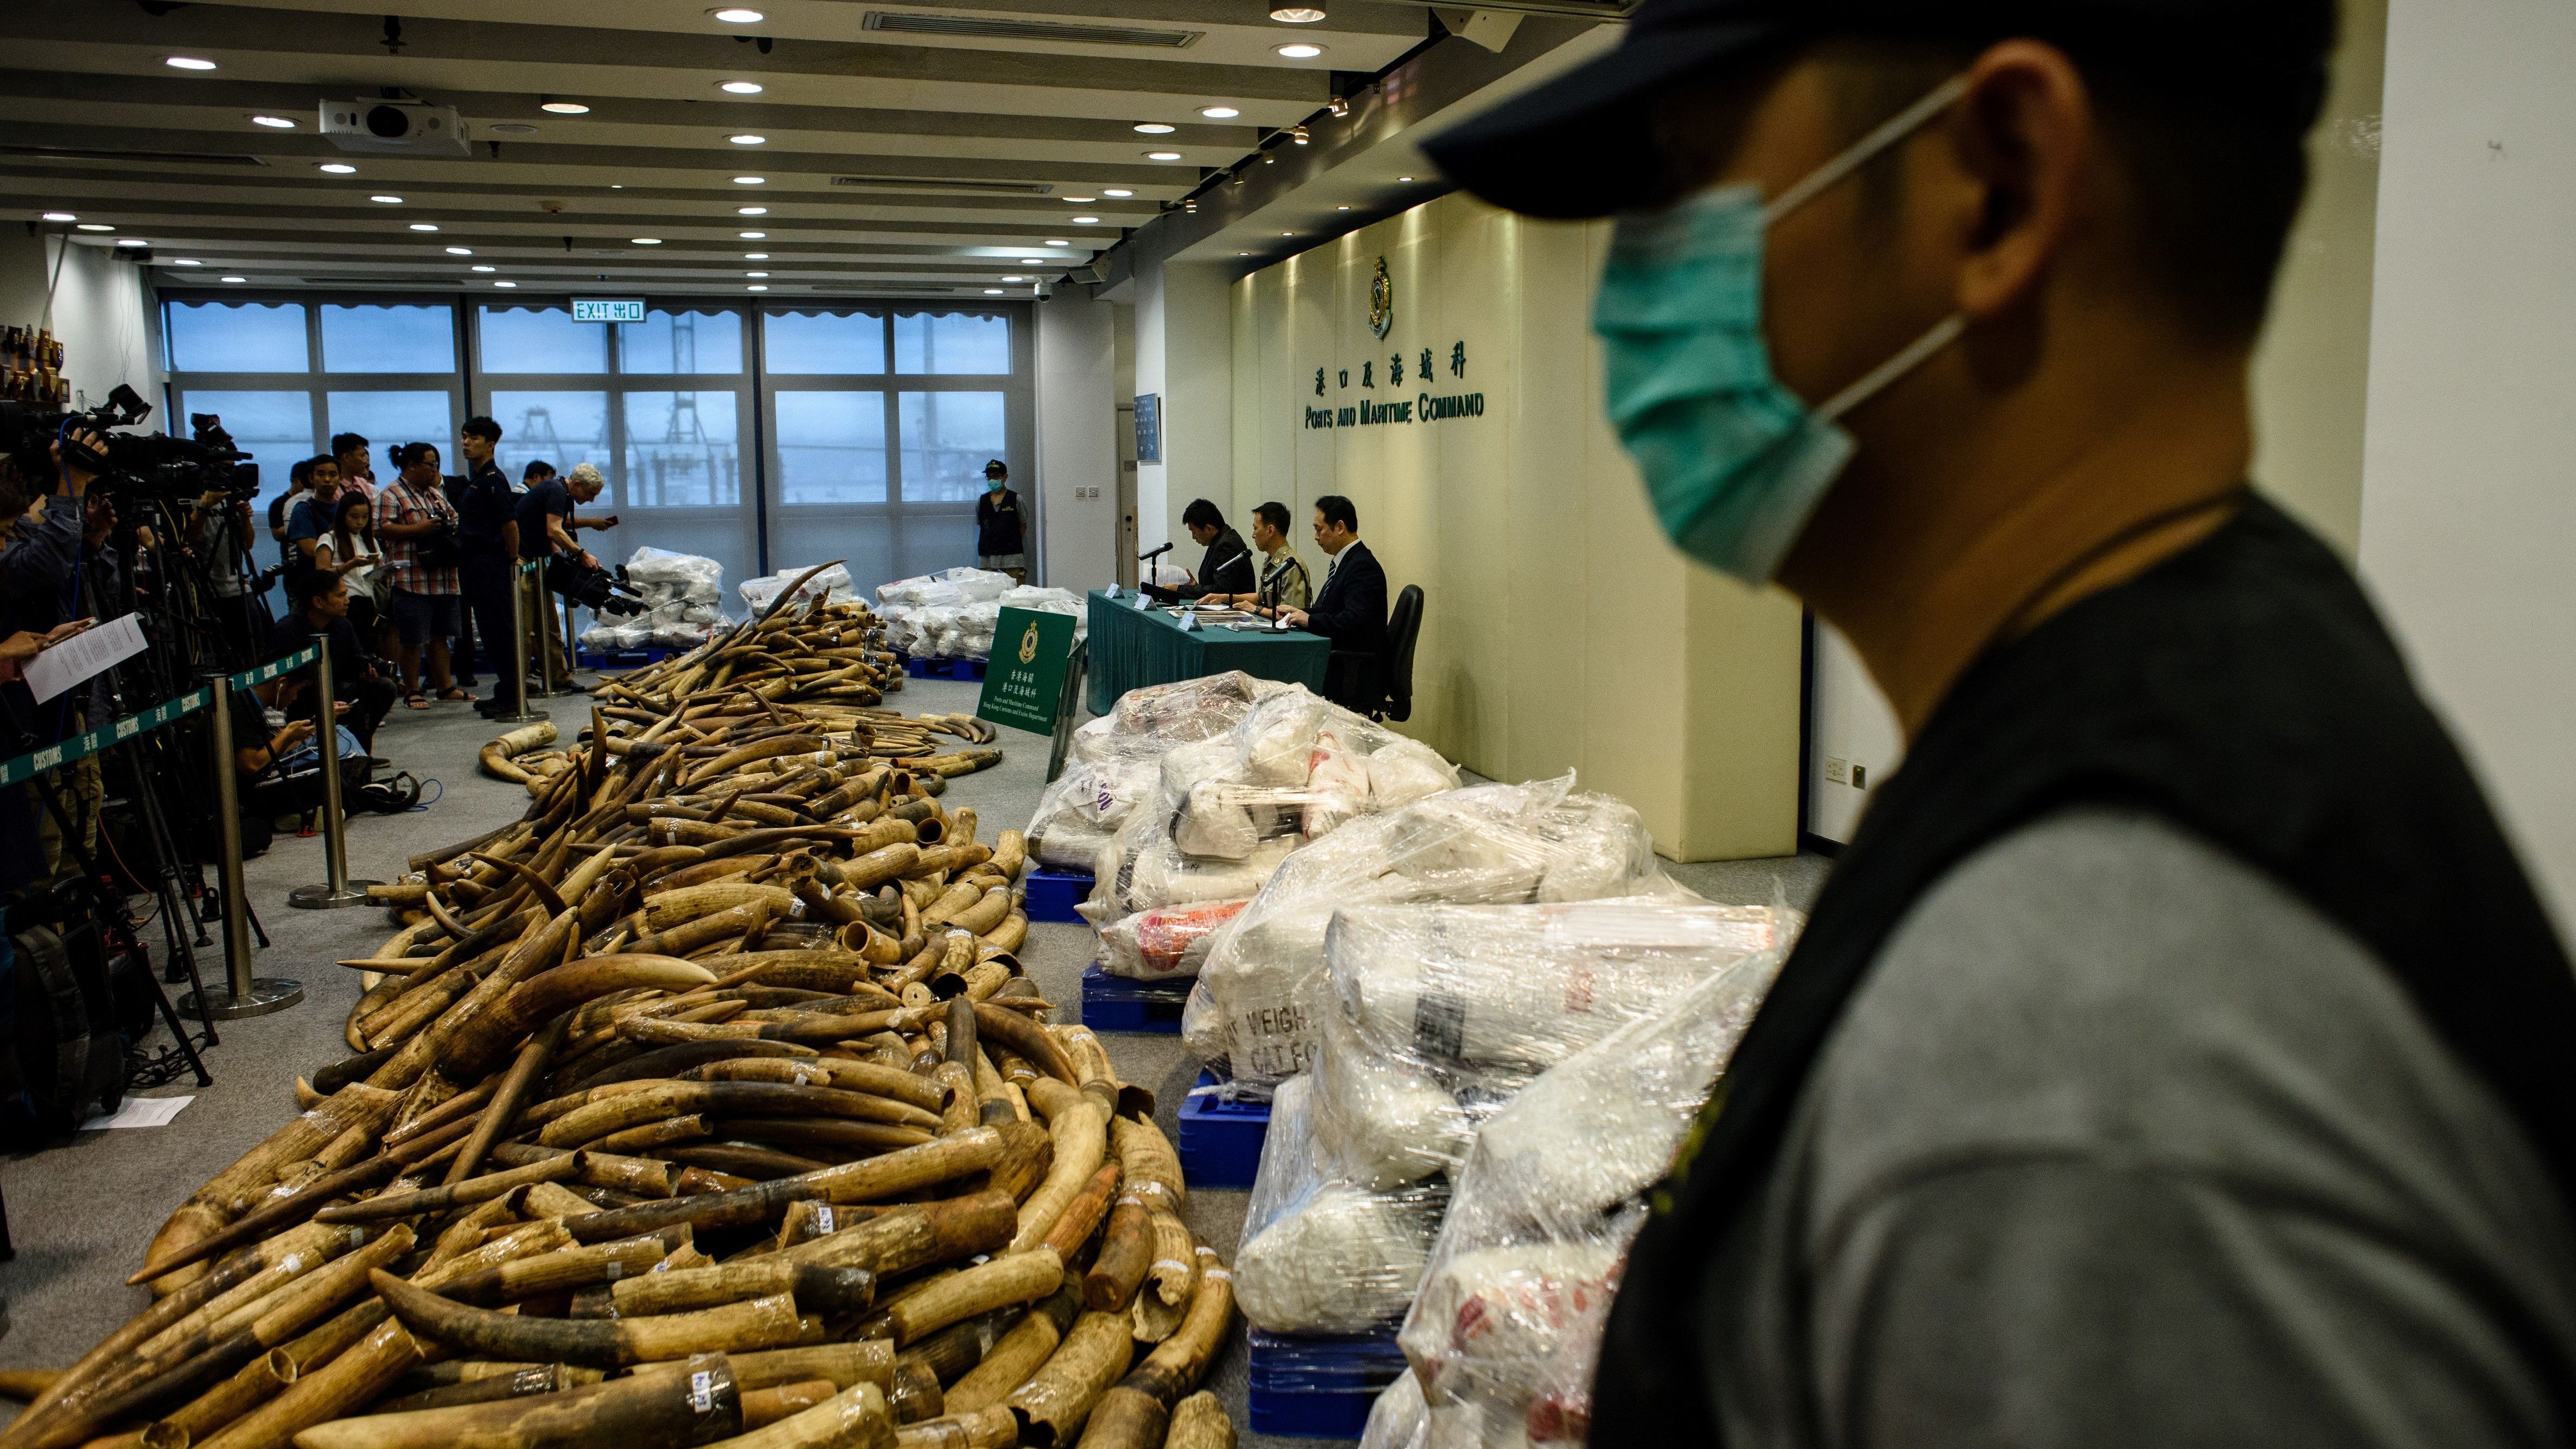 A customs officer stands guard next to seized elephant ivory tusks during a news conference at the Kwai Chung Customhouse Cargo Examination Compound in Hong Kong on Thursday.